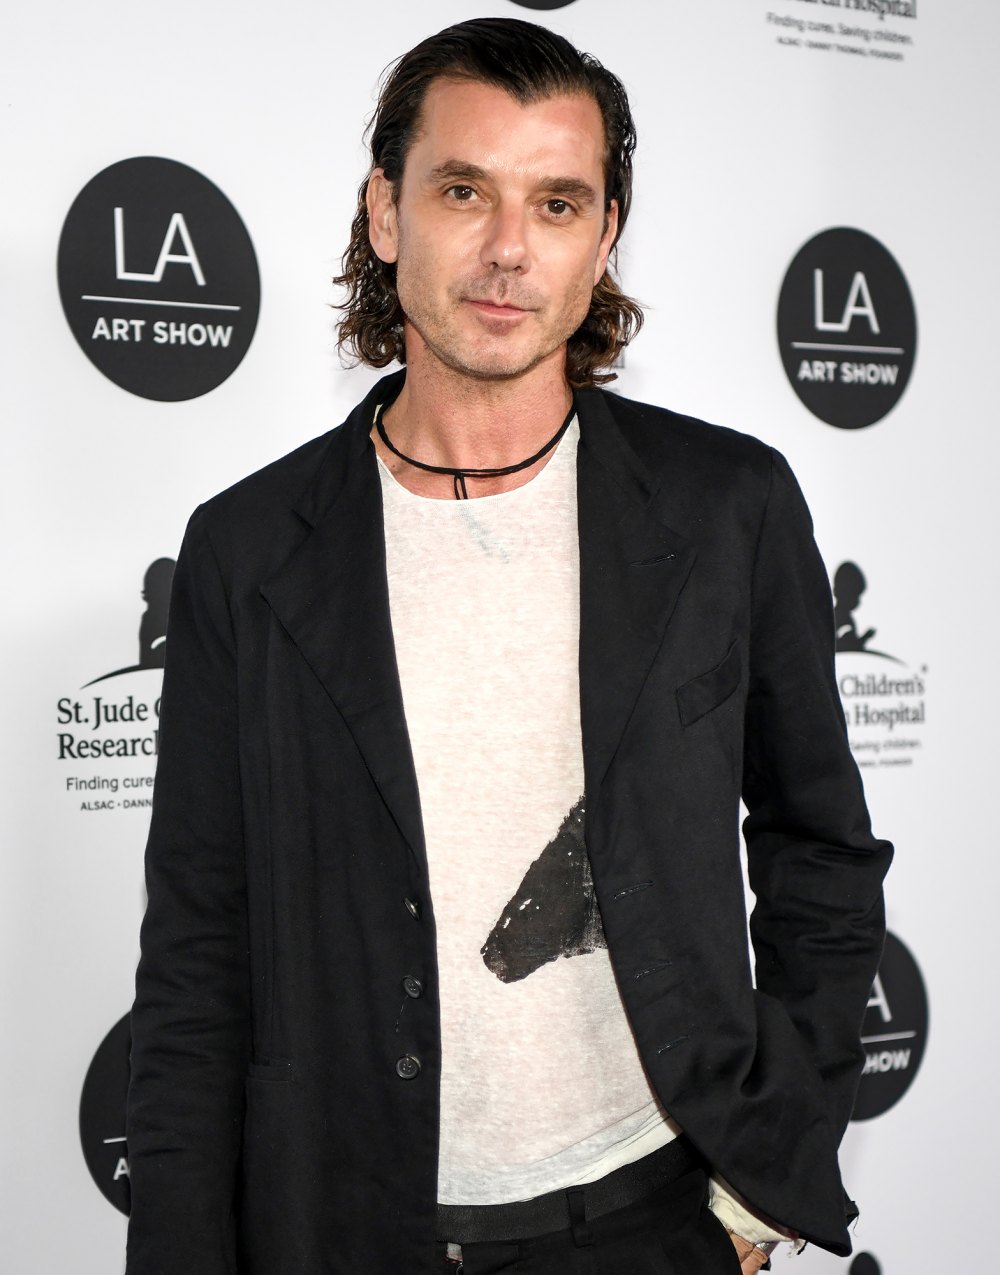 Gavin Rossdale Praises 17-Year-Old Son Kingston's Songwriting: He's Making Some 'Justin Bieber Quality' Music